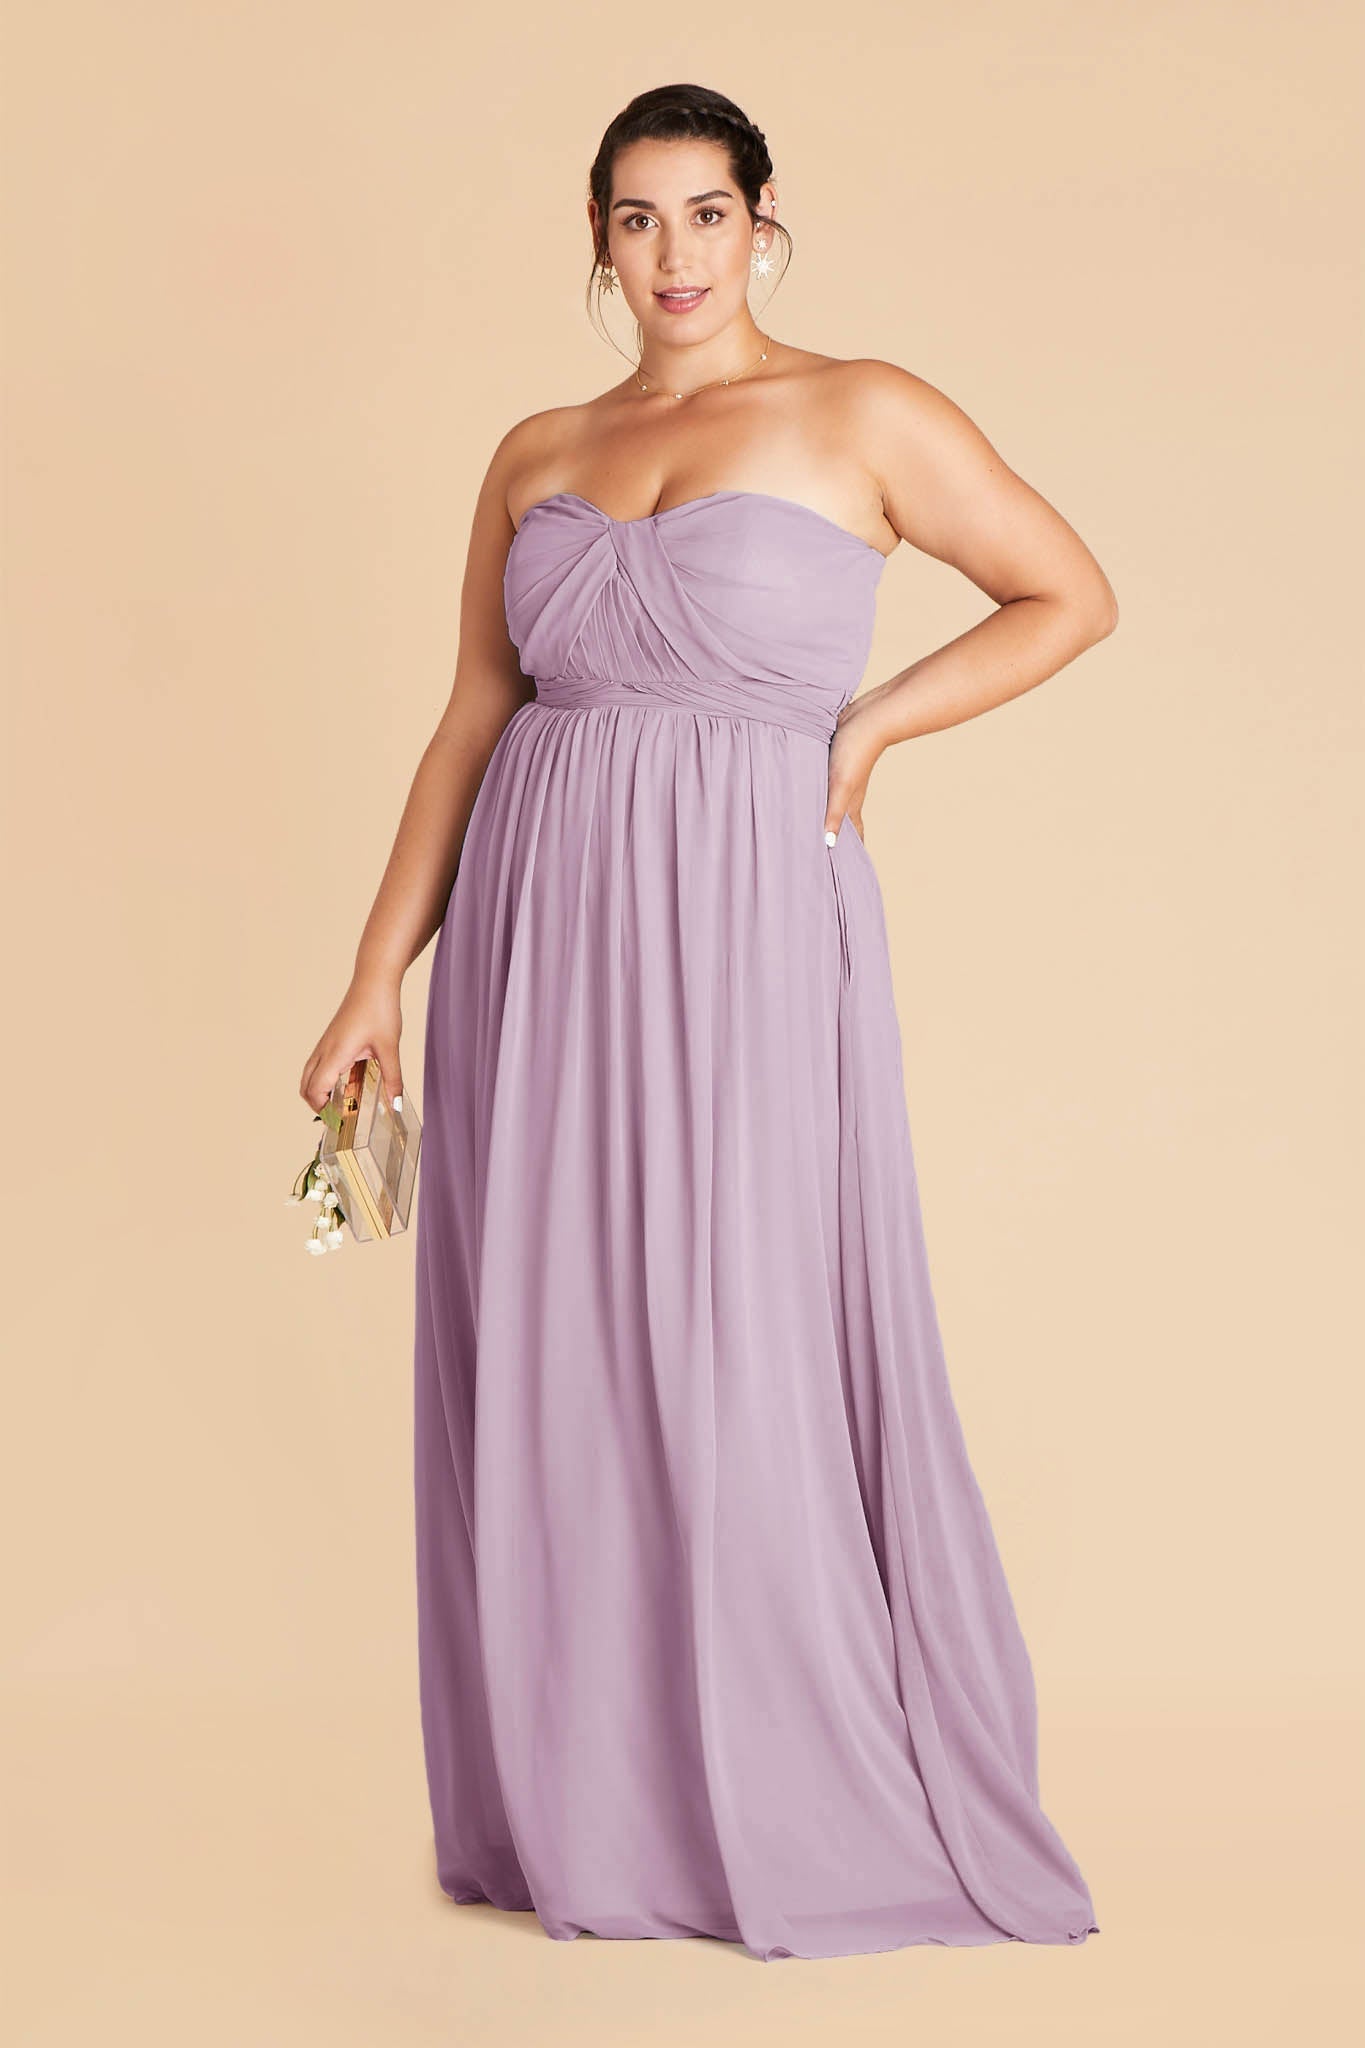 Grace plus size convertible bridesmaid dress in Lavender Chiffon by Birdy Grey, front view